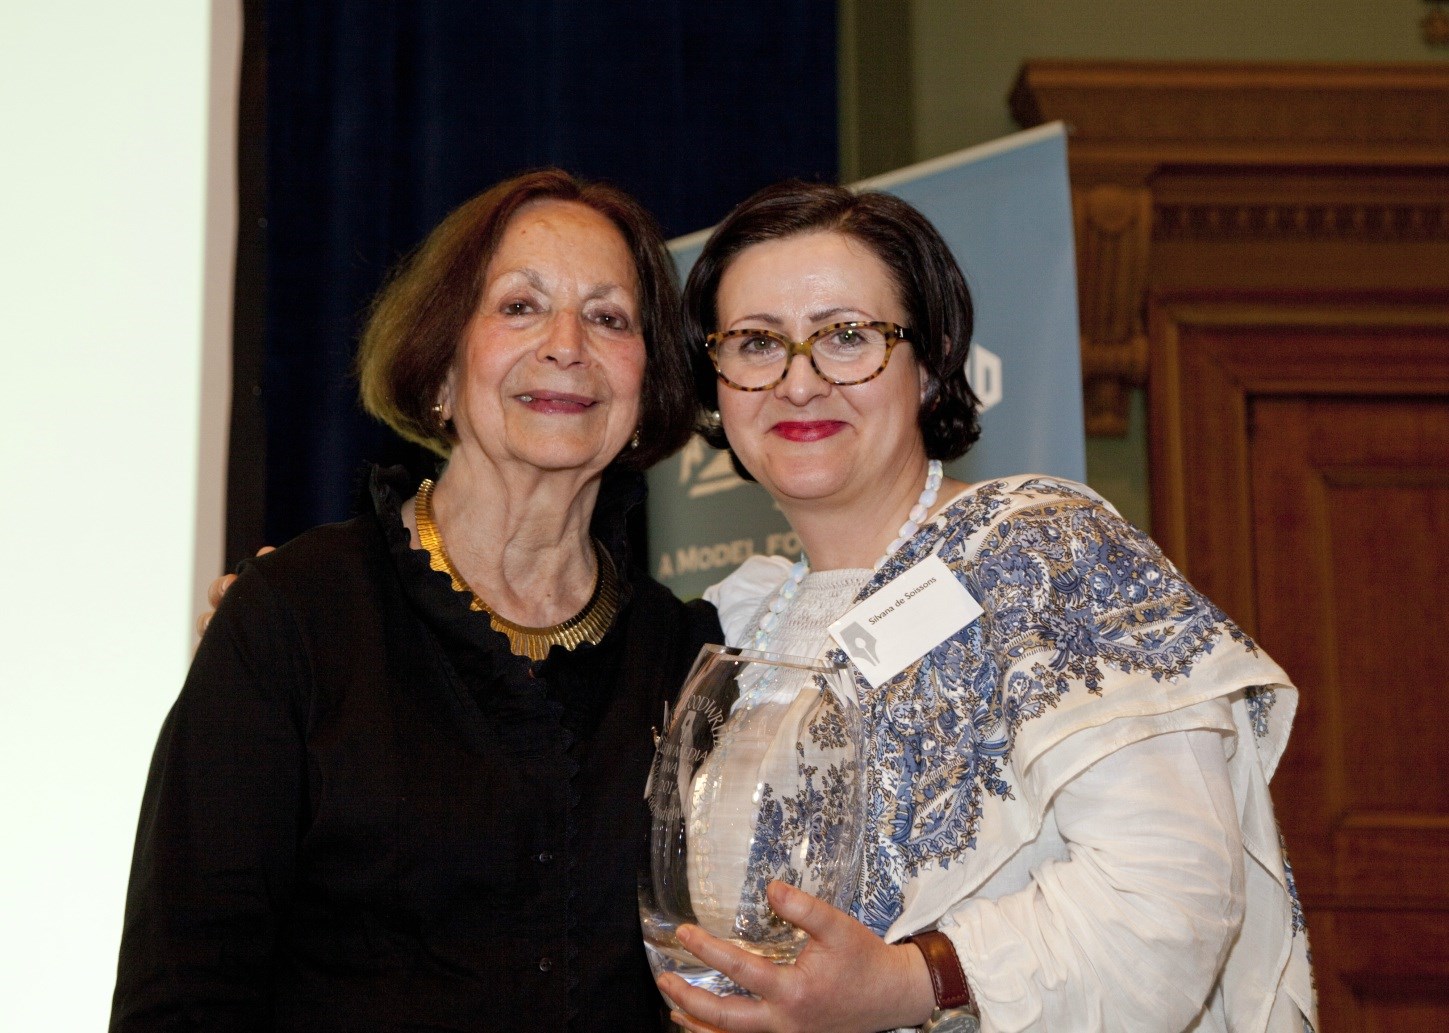 Claudia Roden presenting Silvana de Soissons with the New Media of the Year Award